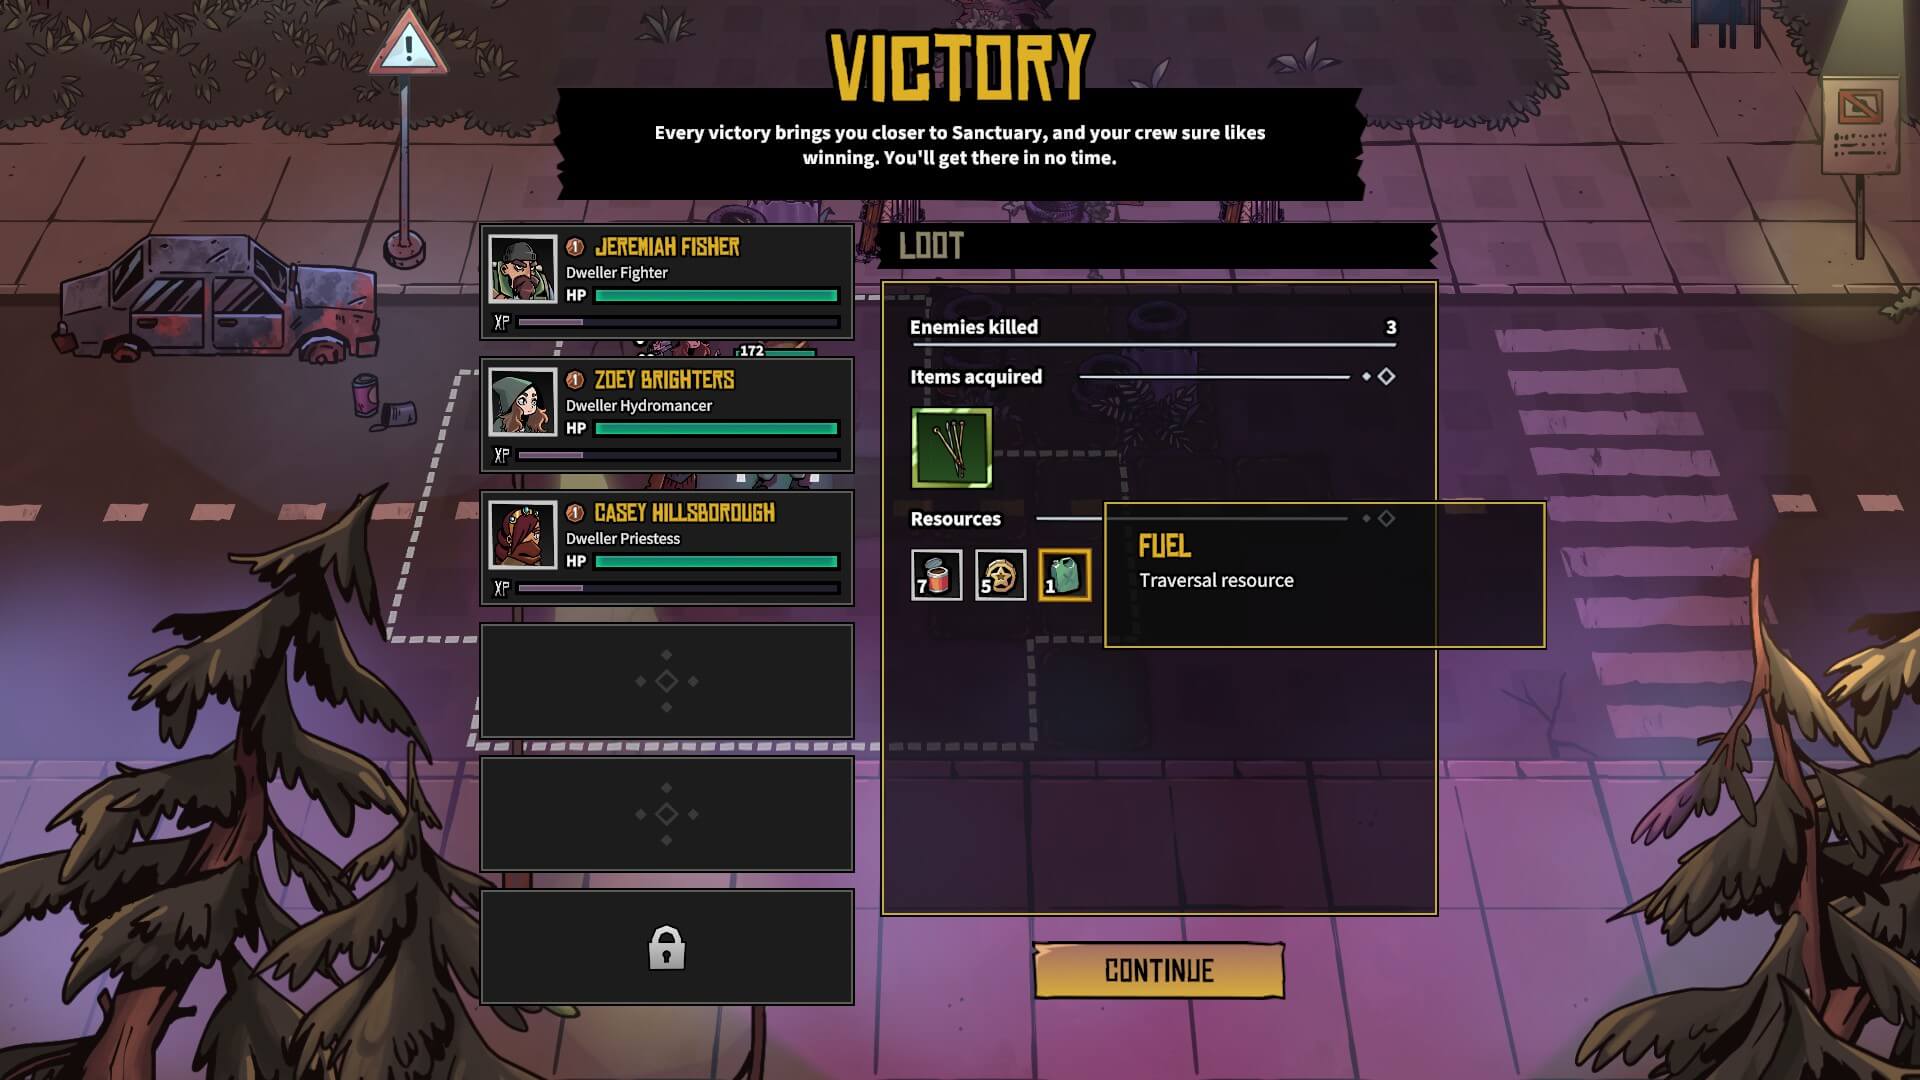 The victory screen that displays after finishing a fight. The left is my team and how much XP they gained.